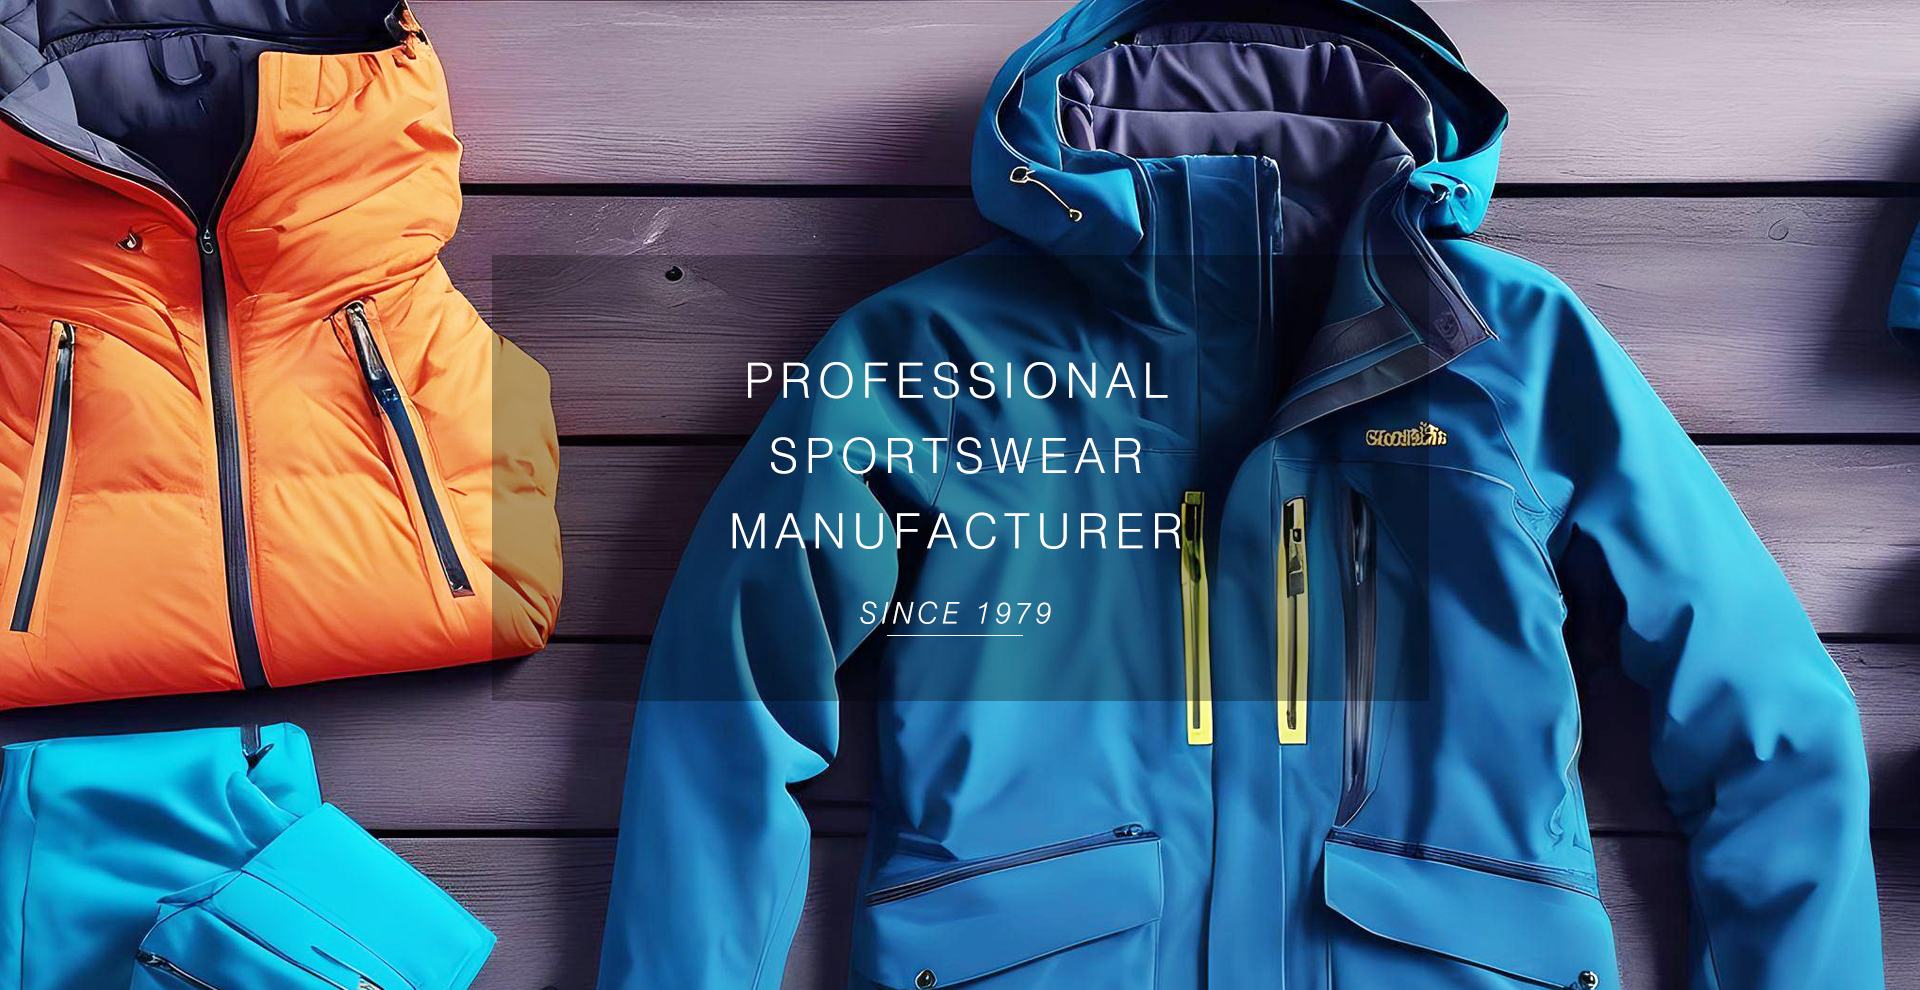 Outdoor Jackets Supplier - Clothing Factory - Garment manufacturer clothing  supplier-Signal Sportswear